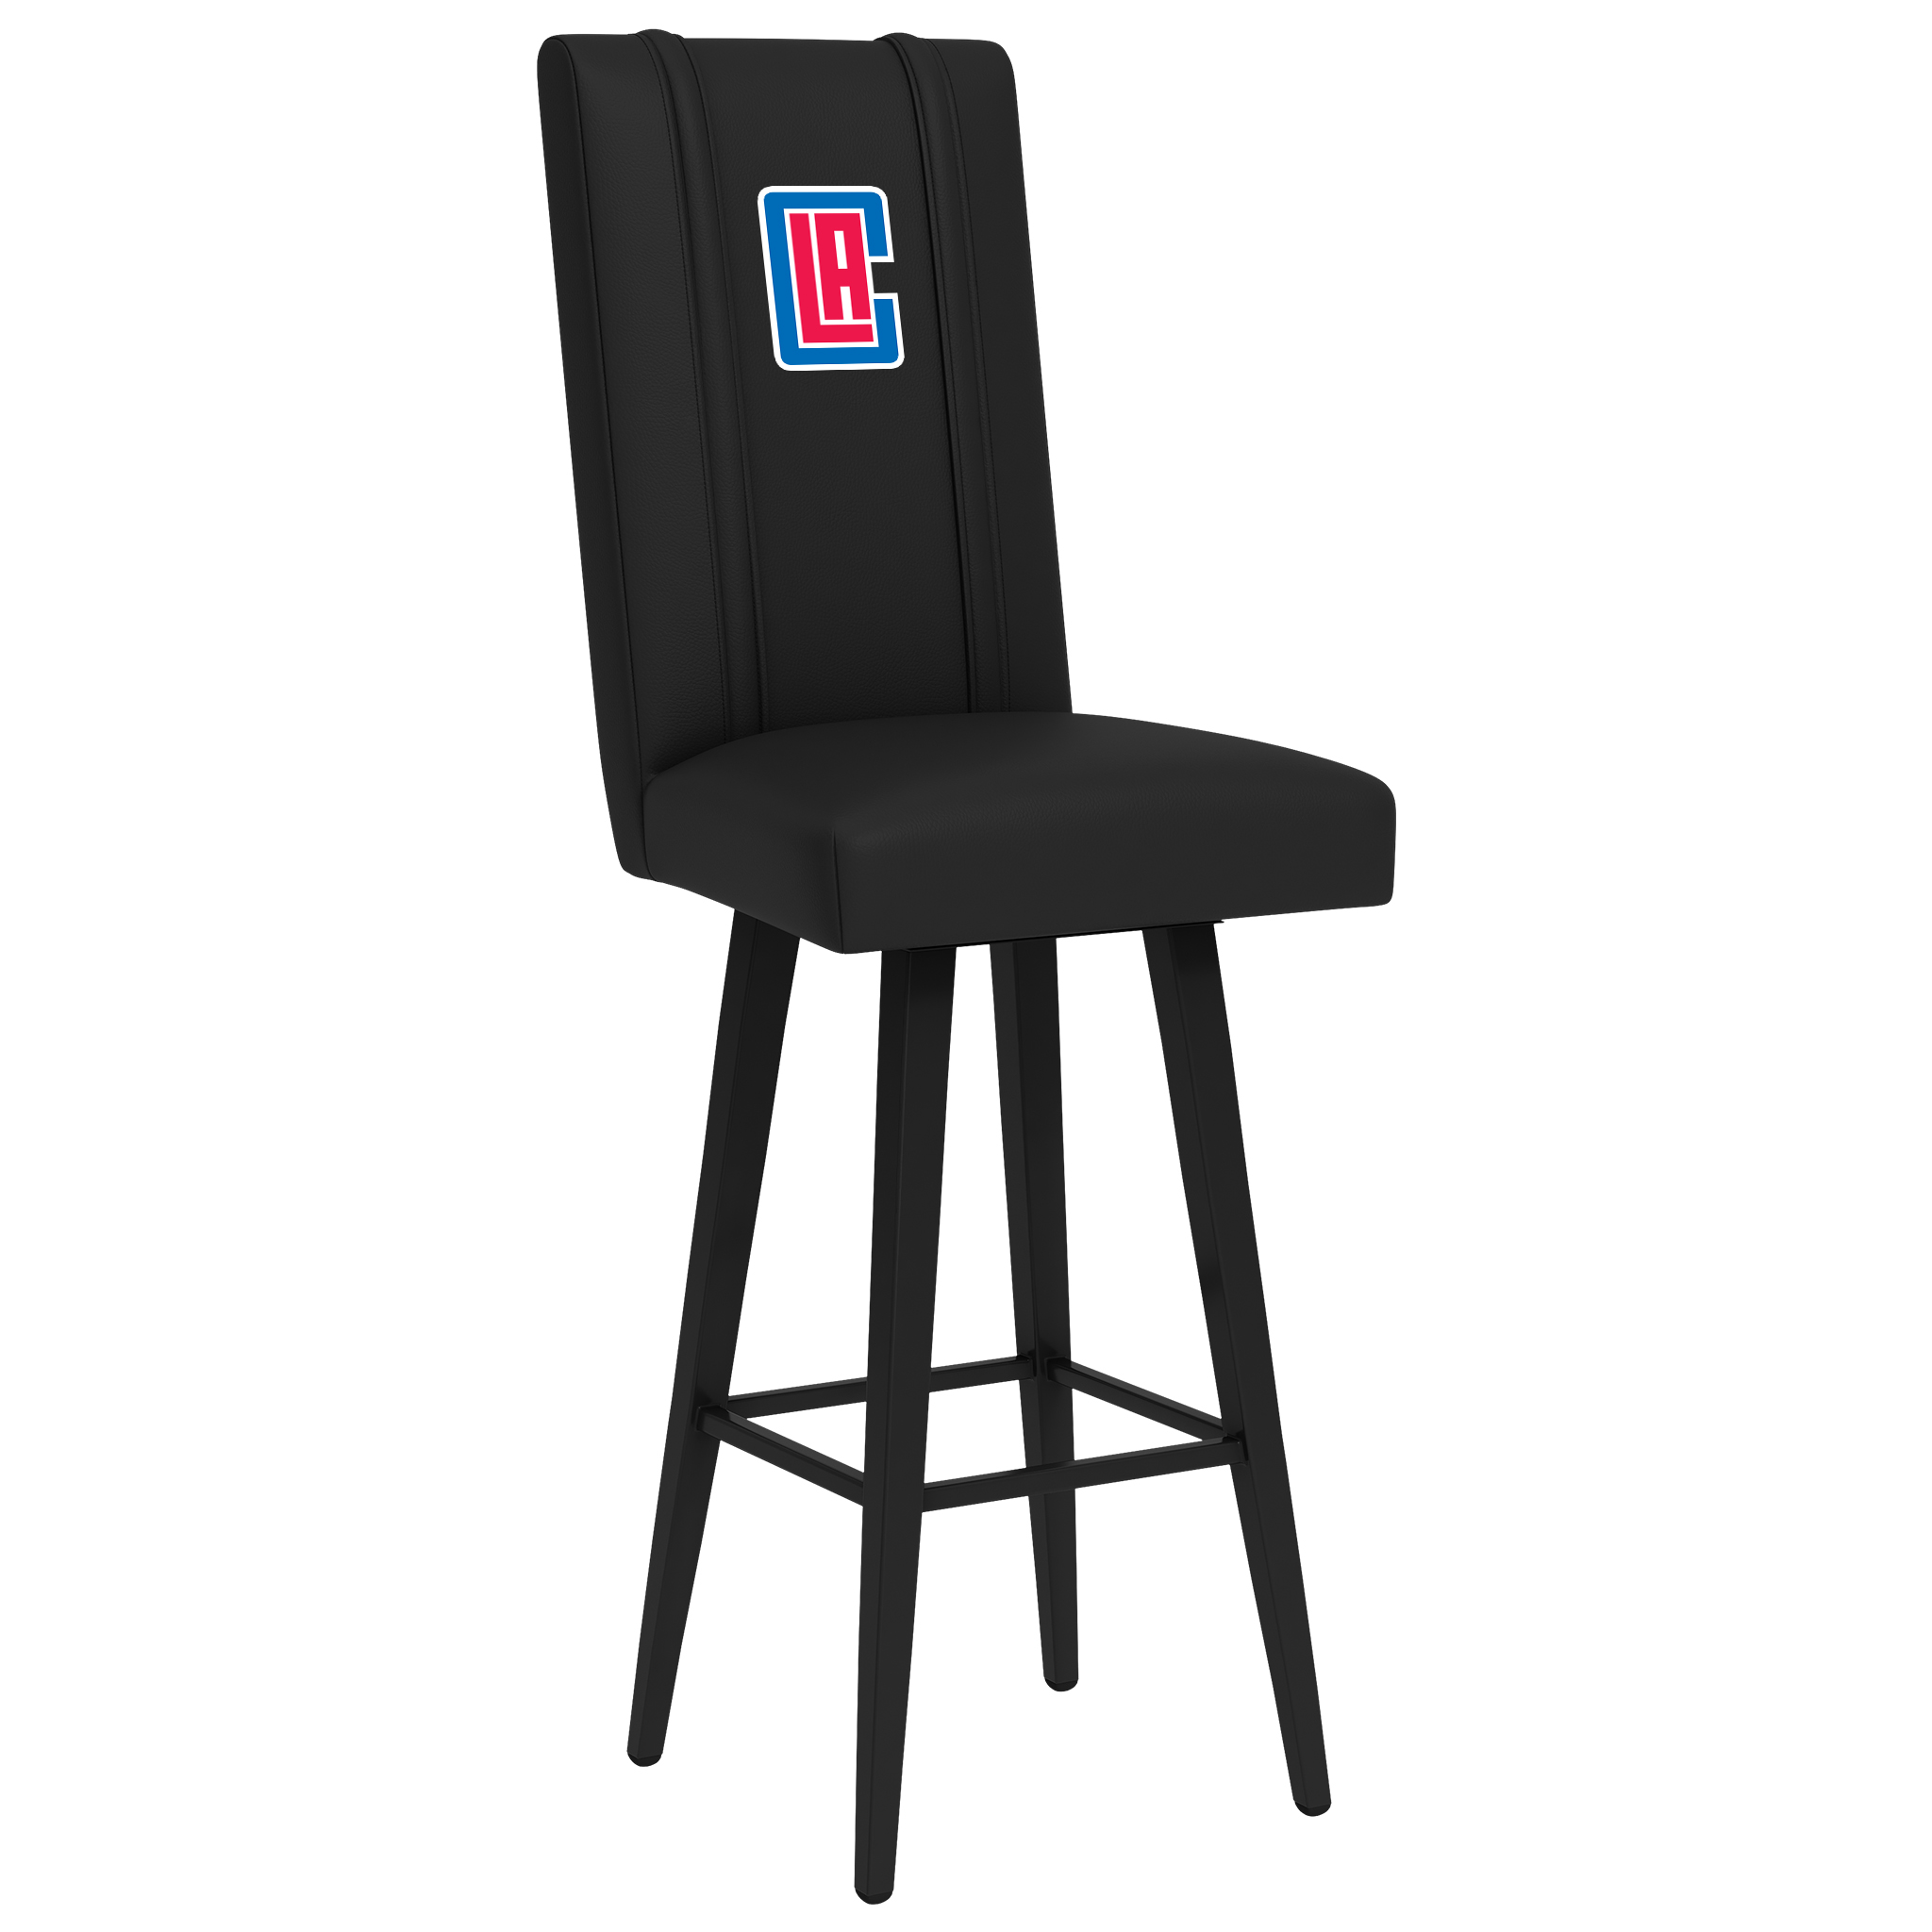 Los Angeles Clippers Swivel Bar Stool 2000 With Los Angeles Clippers Secondary